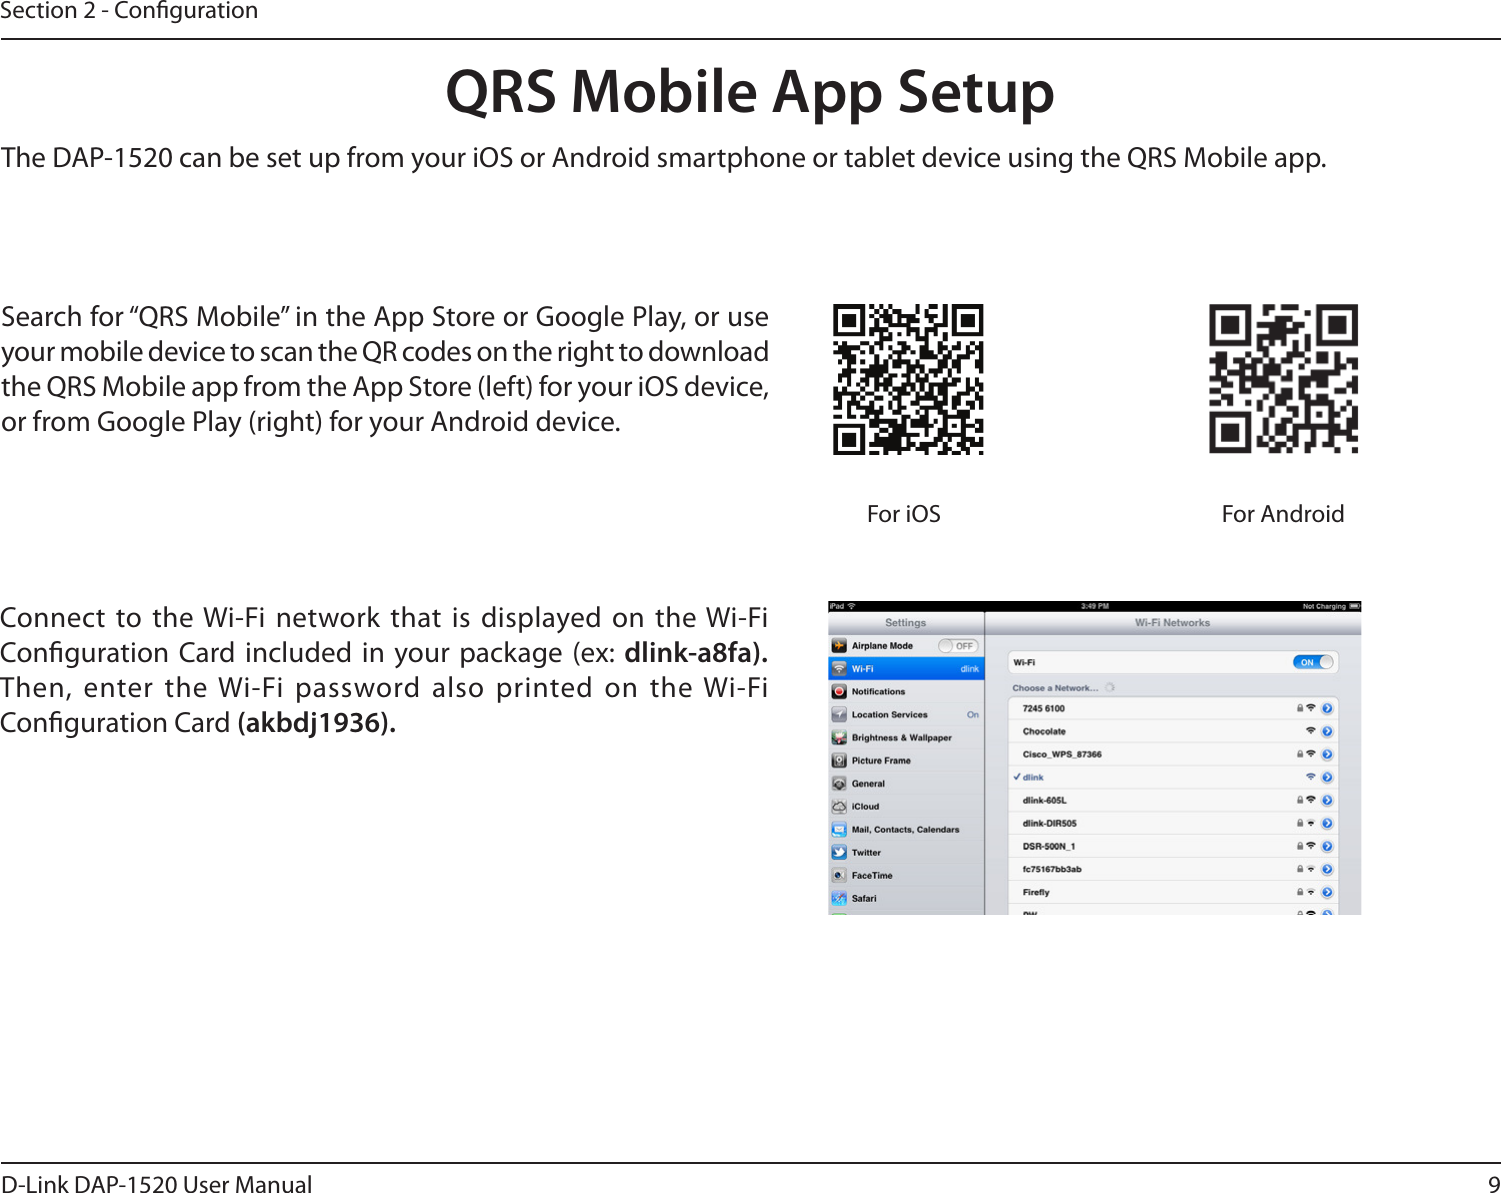 9D-Link DAP-1520 User ManualSection 2 - CongurationQRS Mobile App SetupSearch for “QRS Mobile” in the App Store or Google Play, or use your mobile device to scan the QR codes on the right to download the QRS Mobile app from the App Store (left) for your iOS device, or from Google Play (right) for your Android device.For iOS For AndroidConnect to the Wi-Fi network that is displayed on the Wi-Fi Conguration Card included in your package (ex: dlink-a8fa). Then, enter the Wi-Fi password also printed on the Wi-Fi Conguration Card (akbdj1936). The DAP-1520 can be set up from your iOS or Android smartphone or tablet device using the QRS Mobile app.